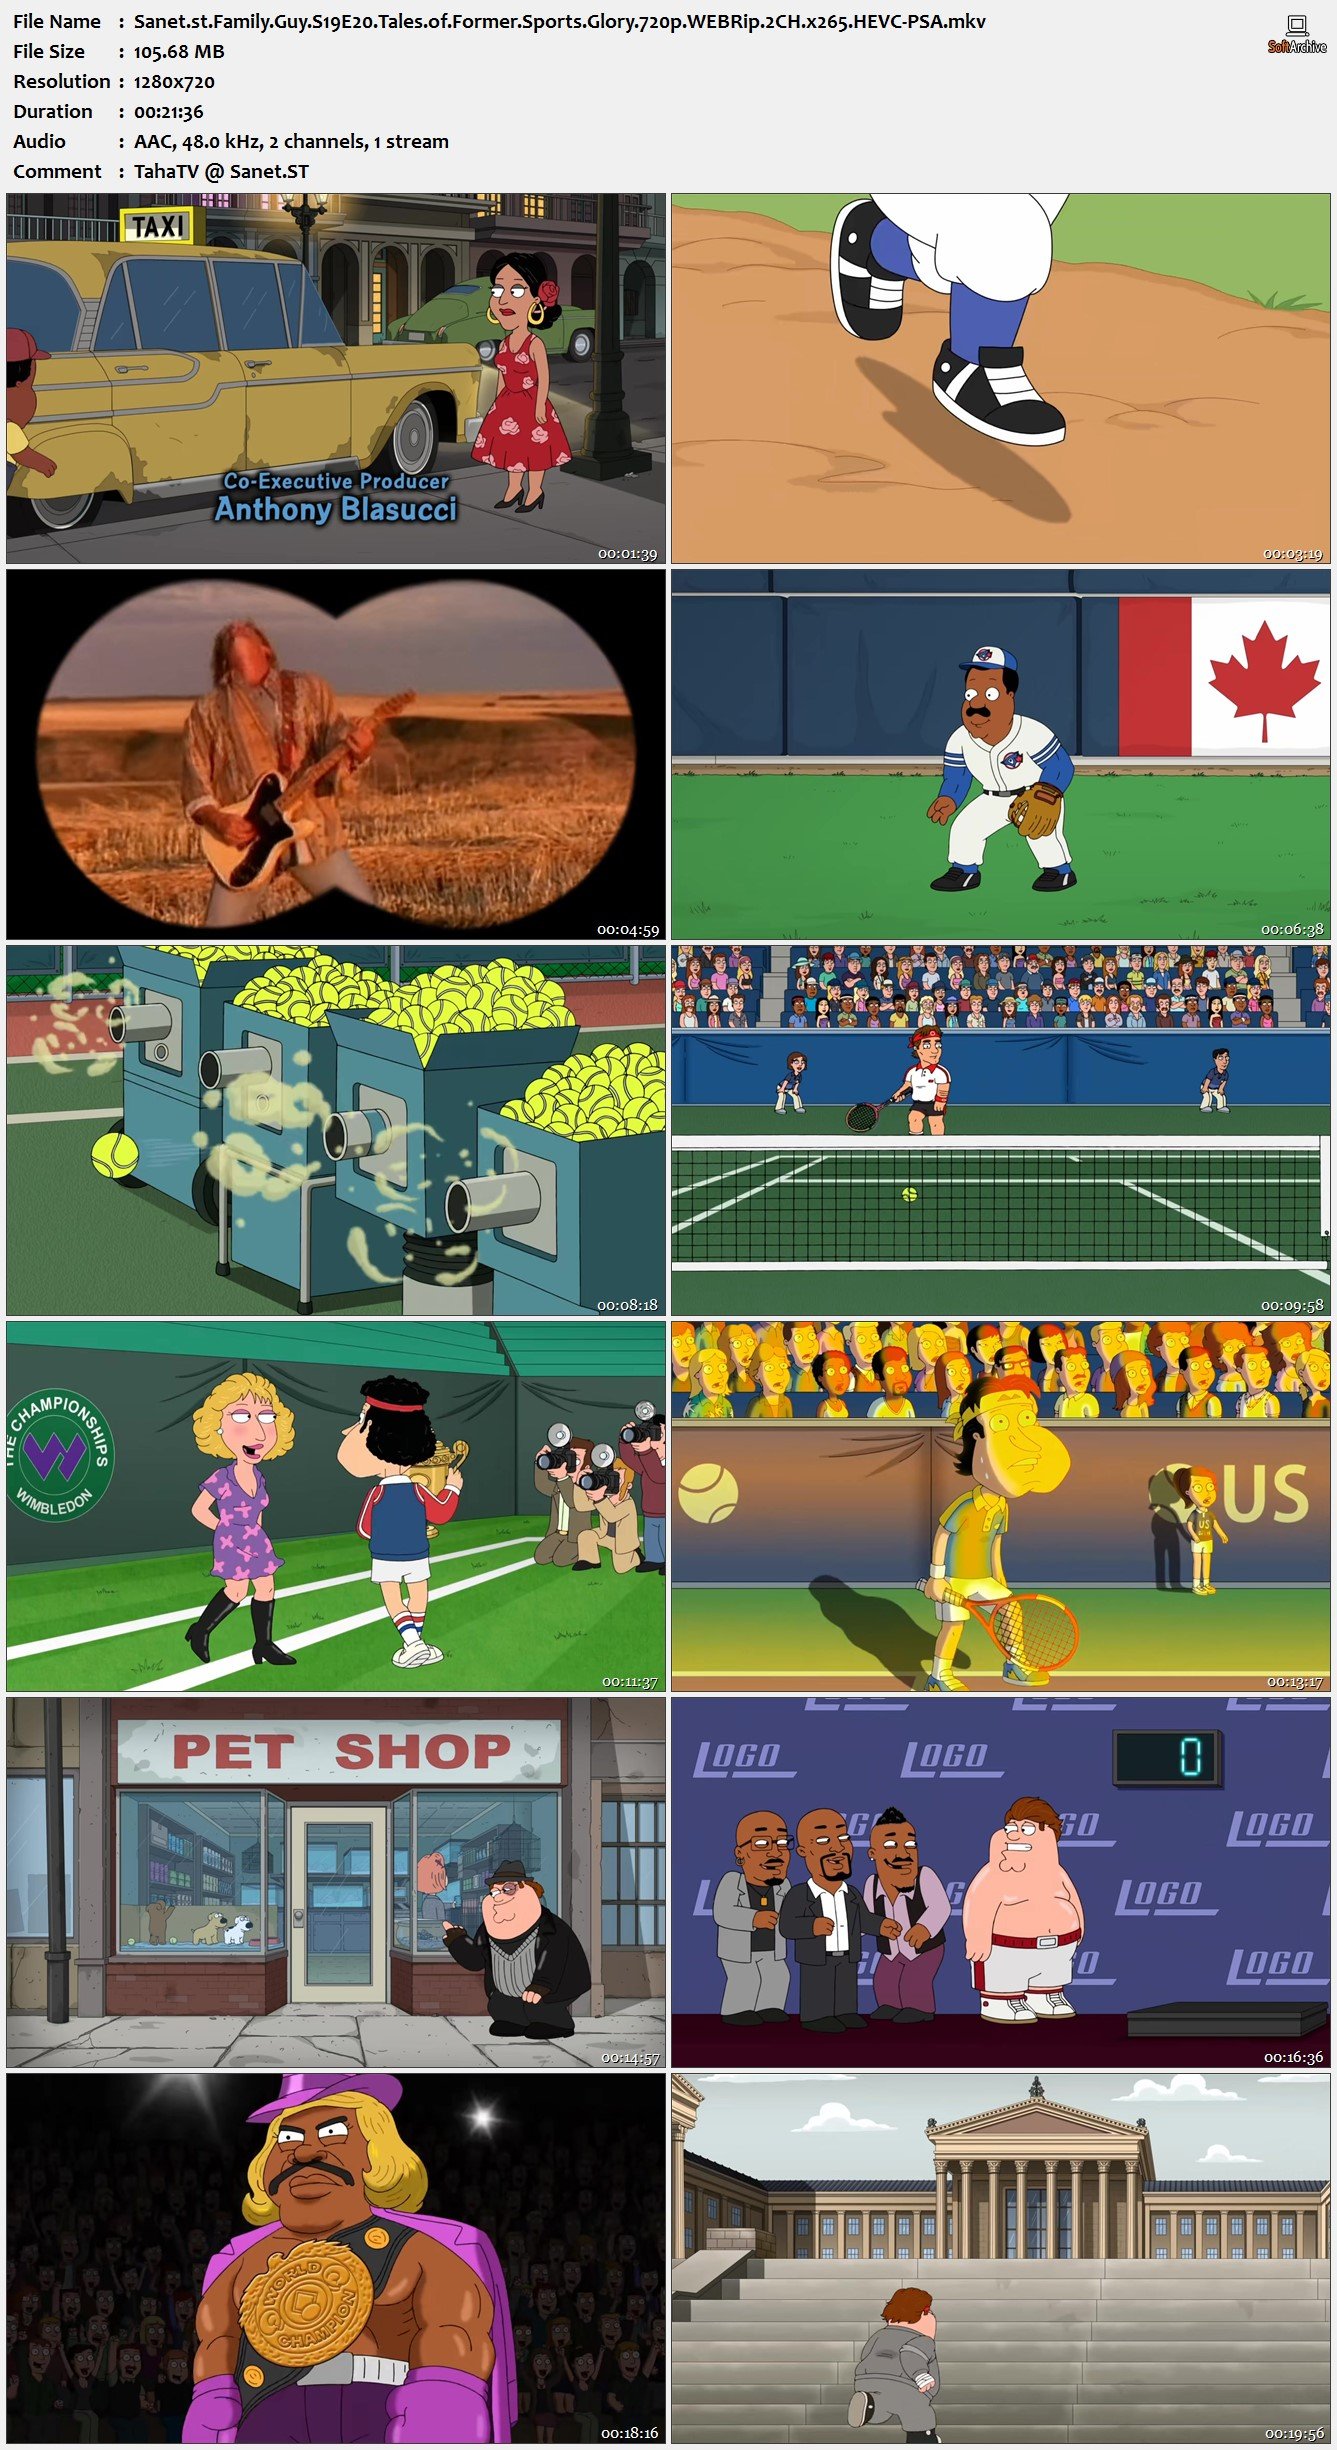 download-family-guy-s19e20-tales-of-former-sports-glory-720p-webrip-2ch